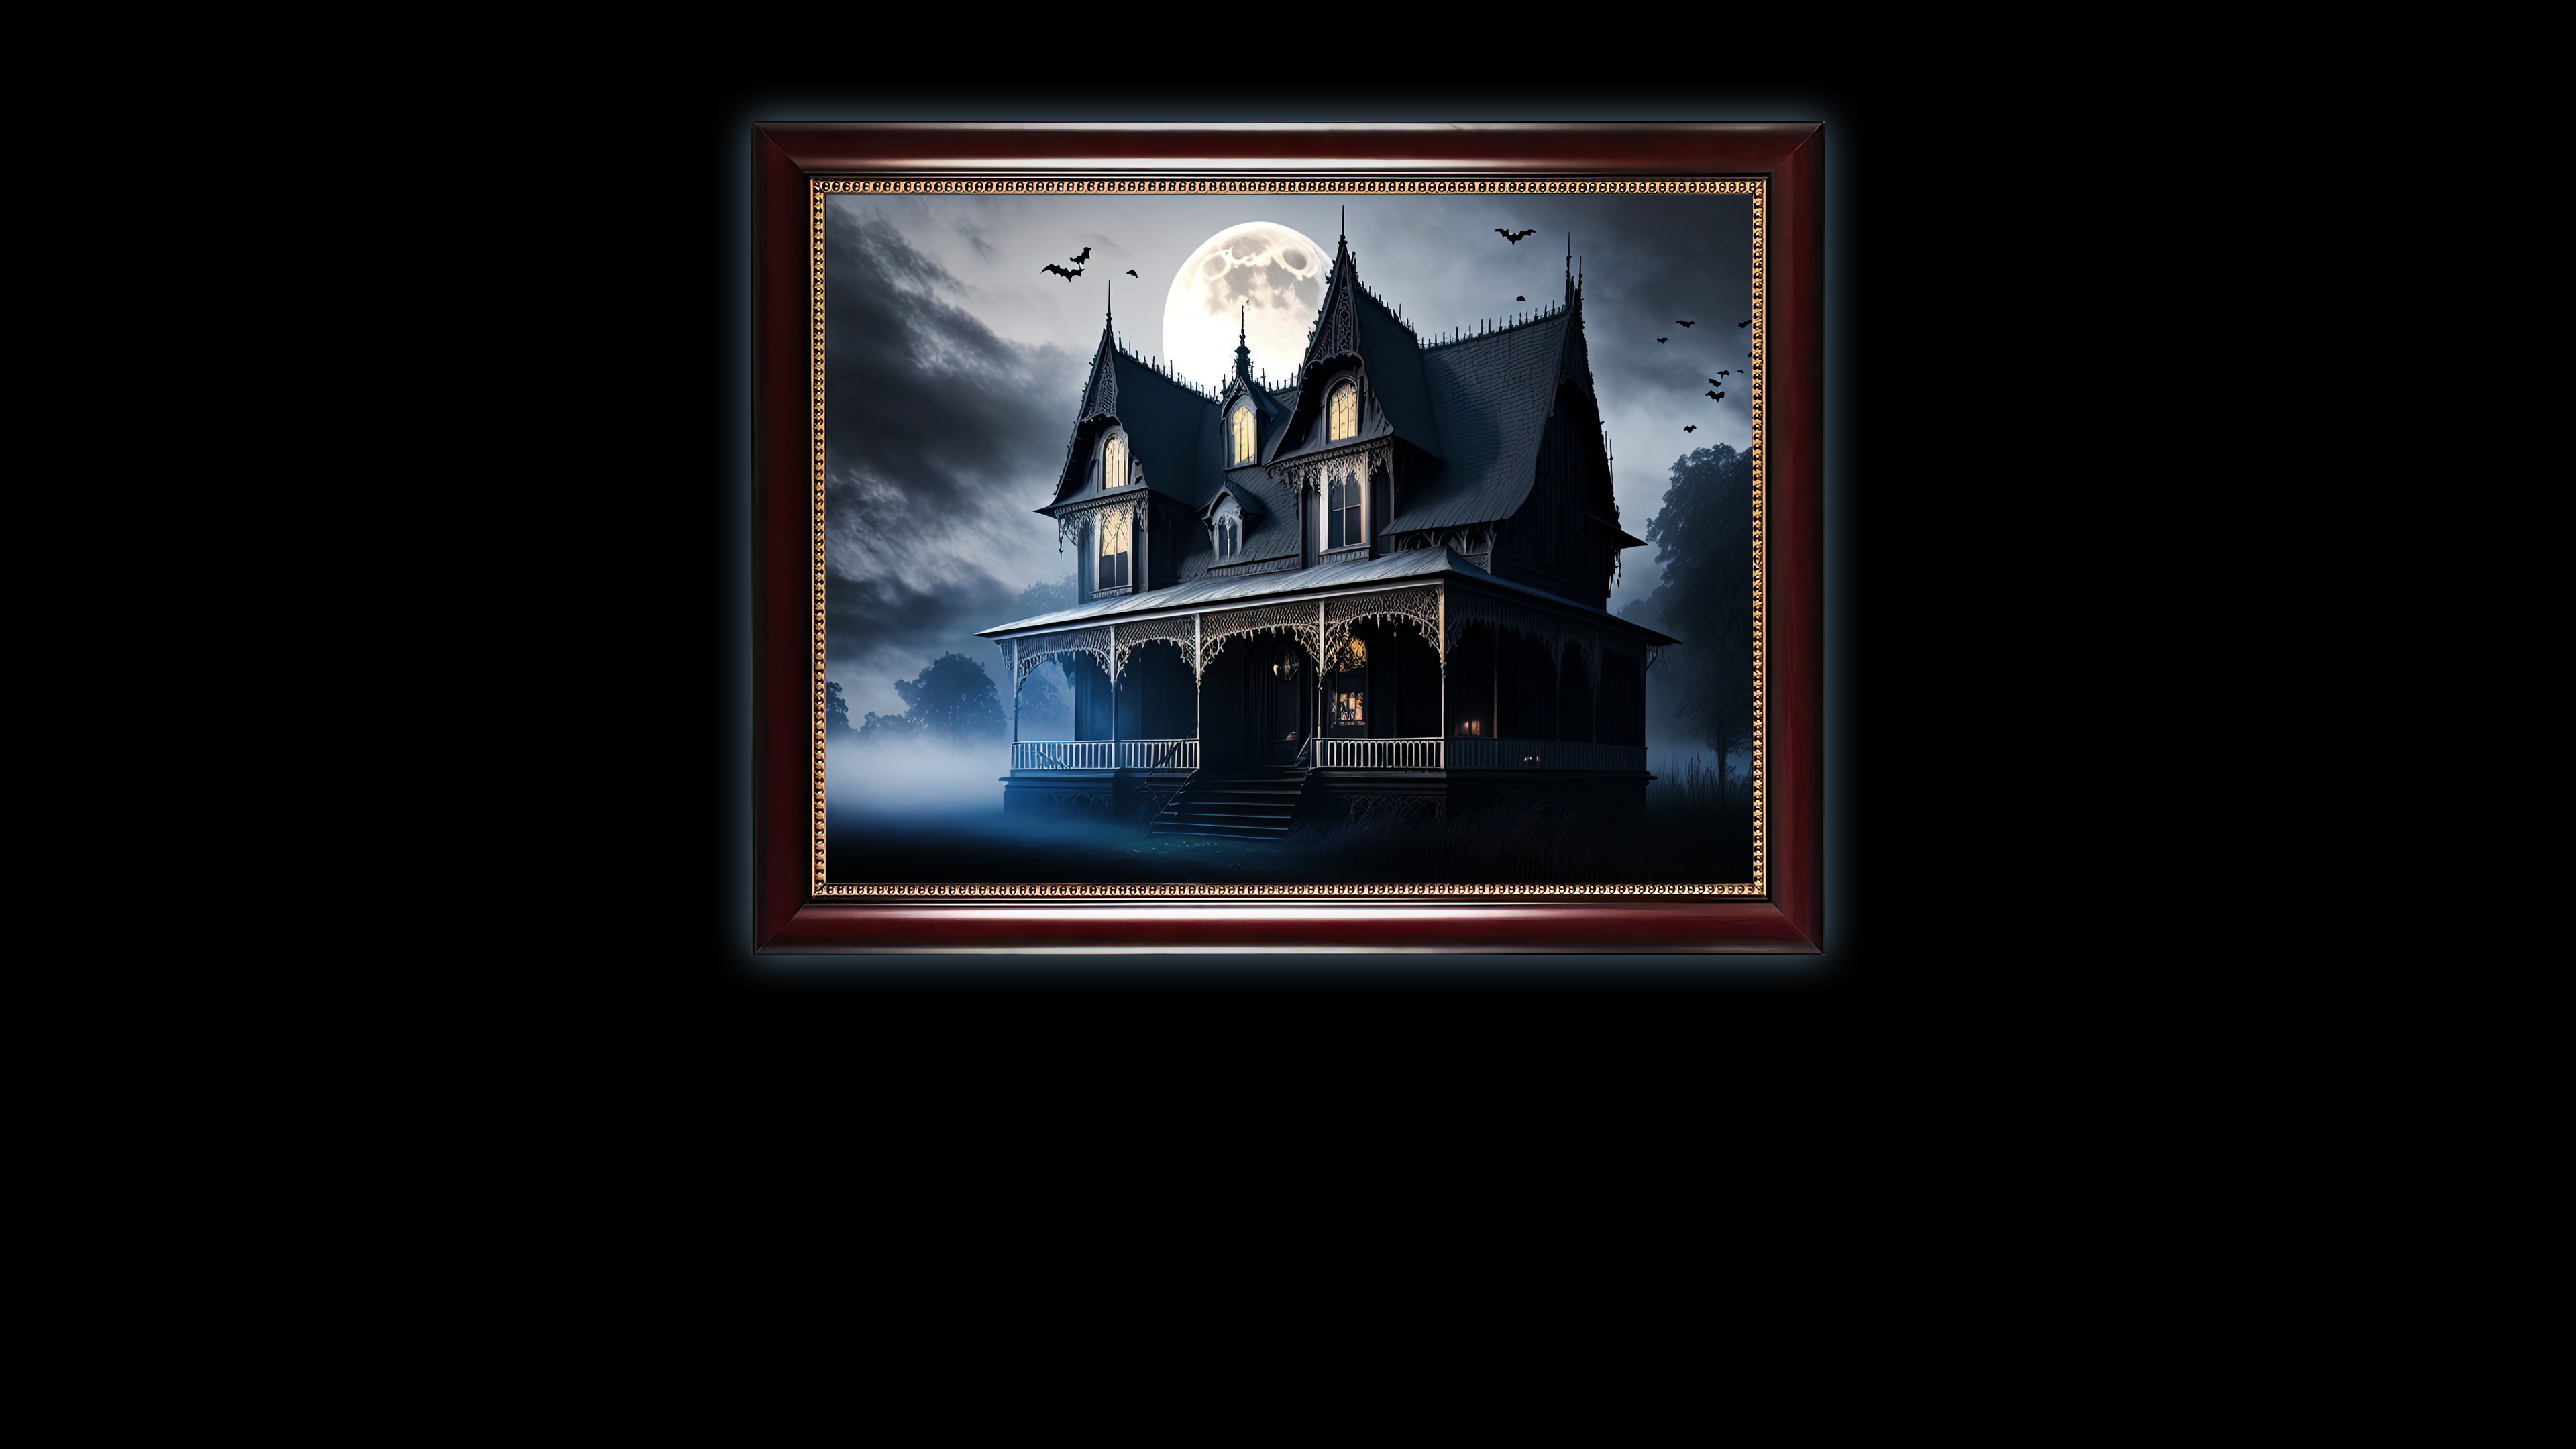 General 3840x2160 AI art house dark haunted mansion Moon sky bats clouds digital art minimalism simple background trees black background stairs picture frames night